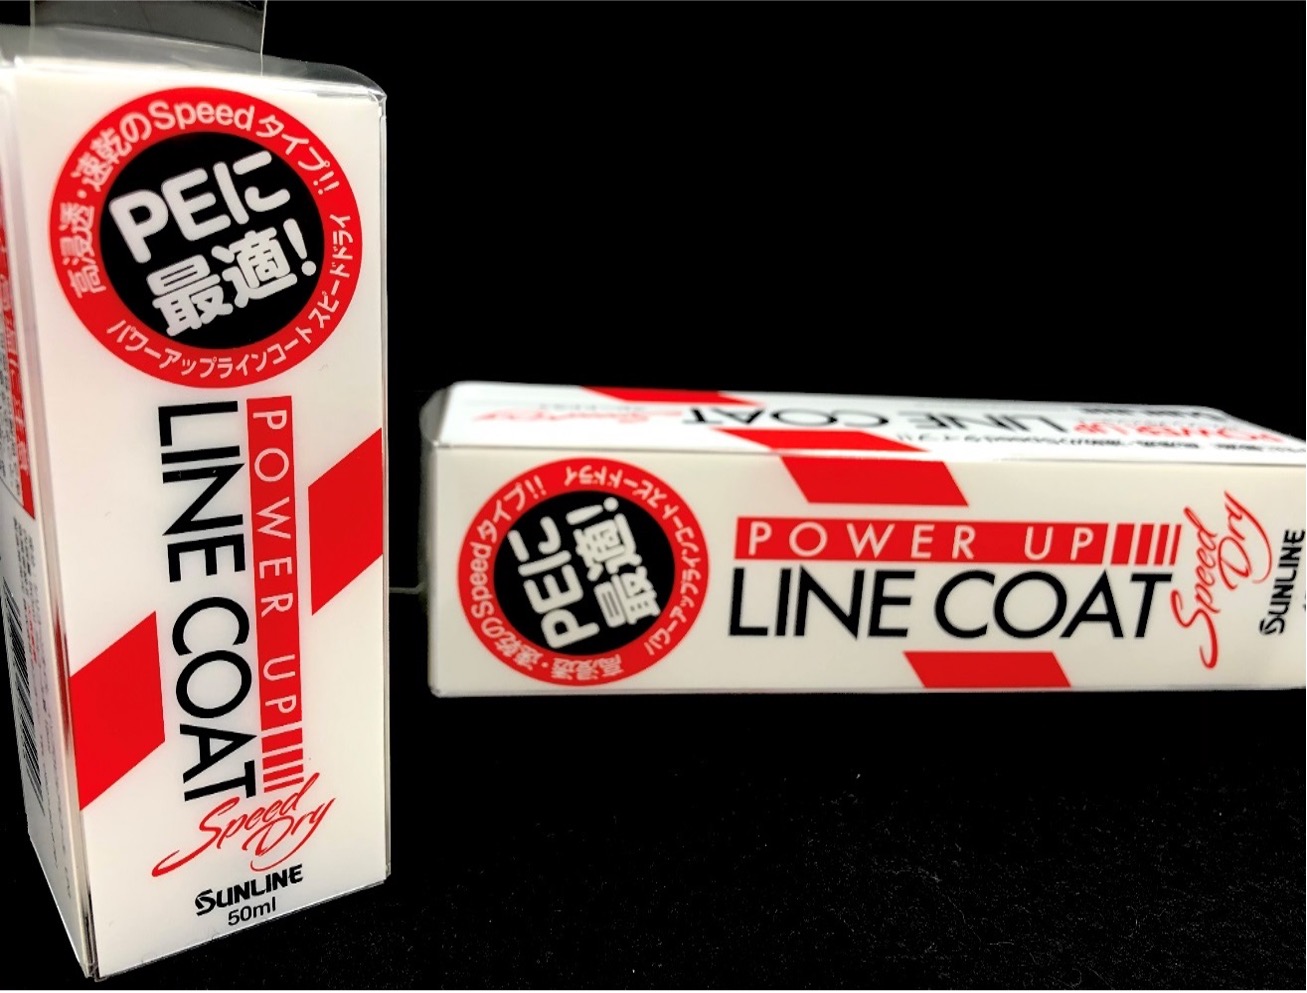 Essential for PE line!! Renewal LINE COAT from SUNLINE